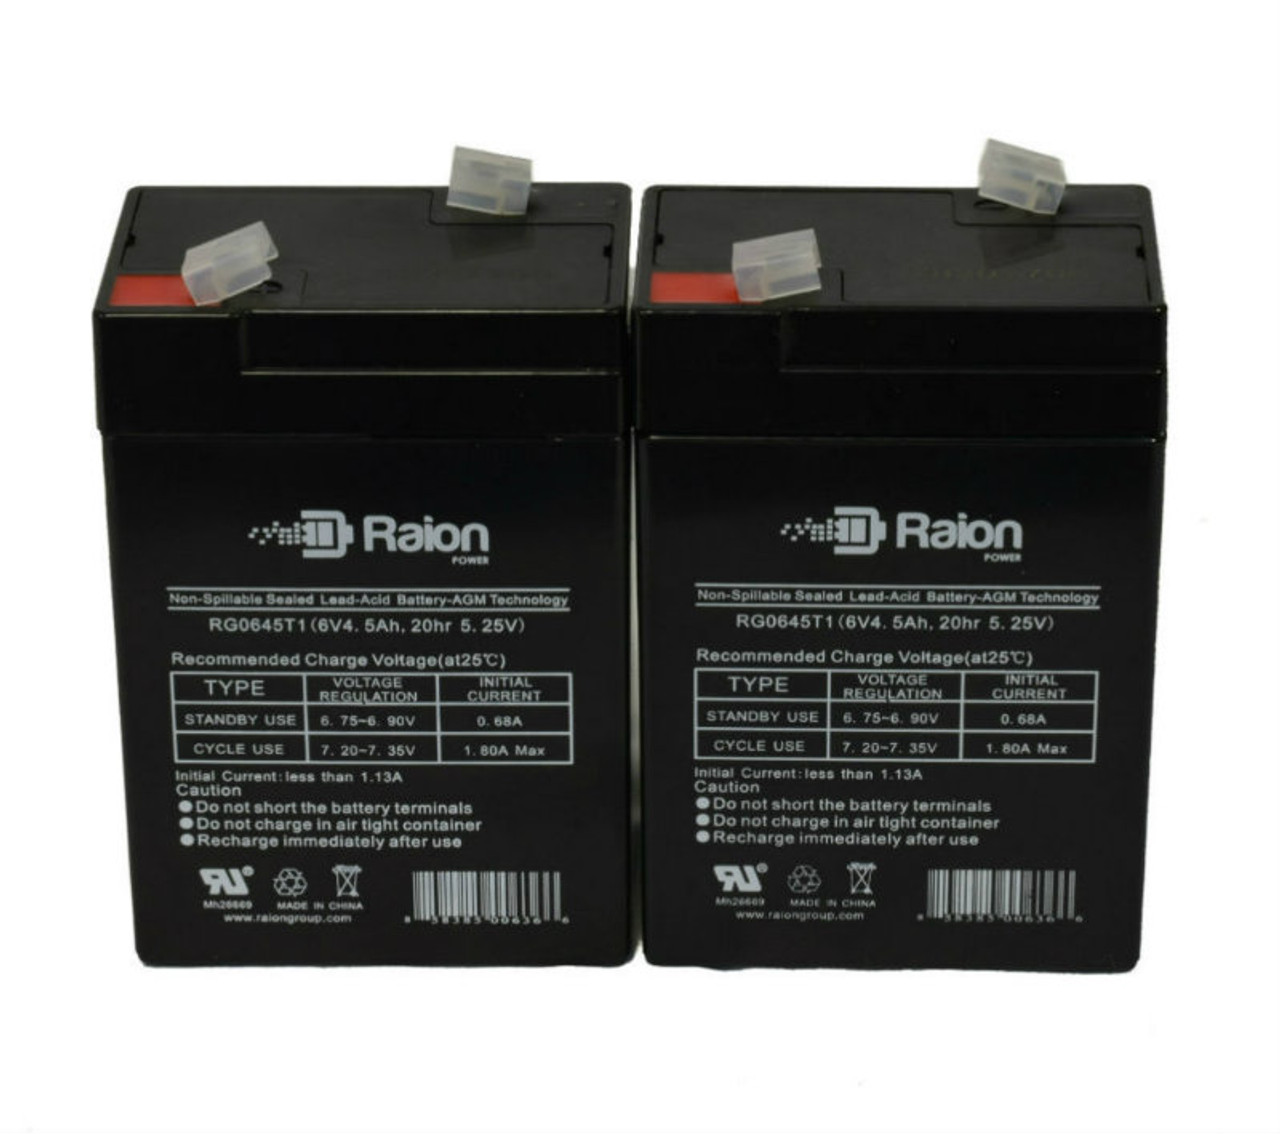 Raion Power 6 Volt 4.5Ah RG0645T1 Replacement Battery for XNB SN06004 - 2 Pack